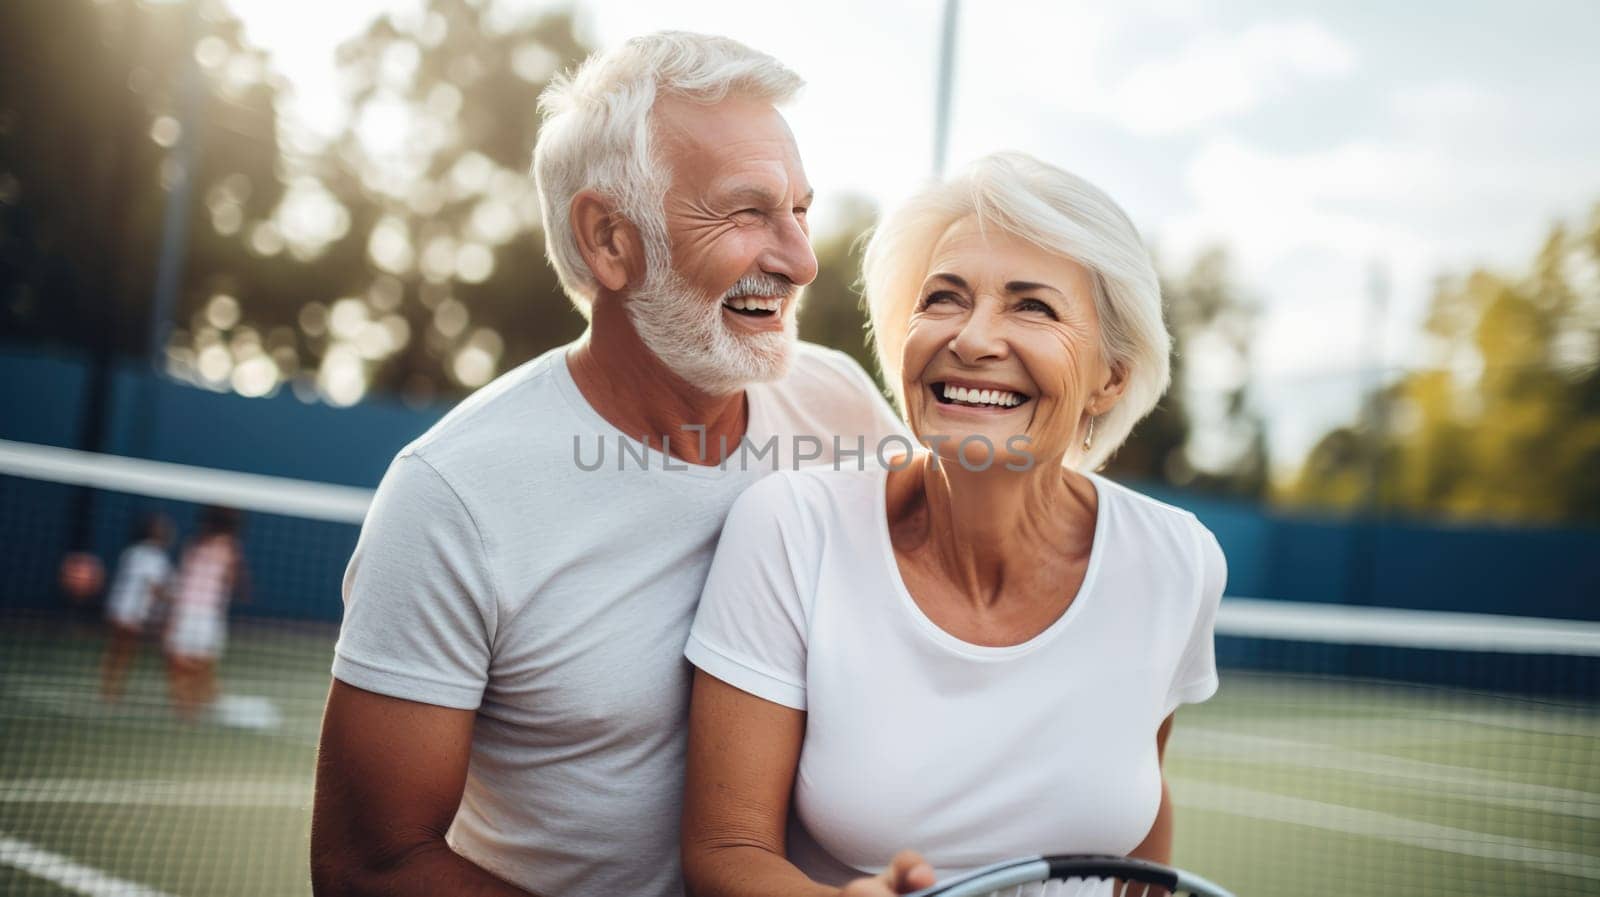 Horizontal shot of a happy elderly couple standing closely together on a tennis court and smiling at each other. They both have sporty outfits on and the man is wearing a tennis cap.